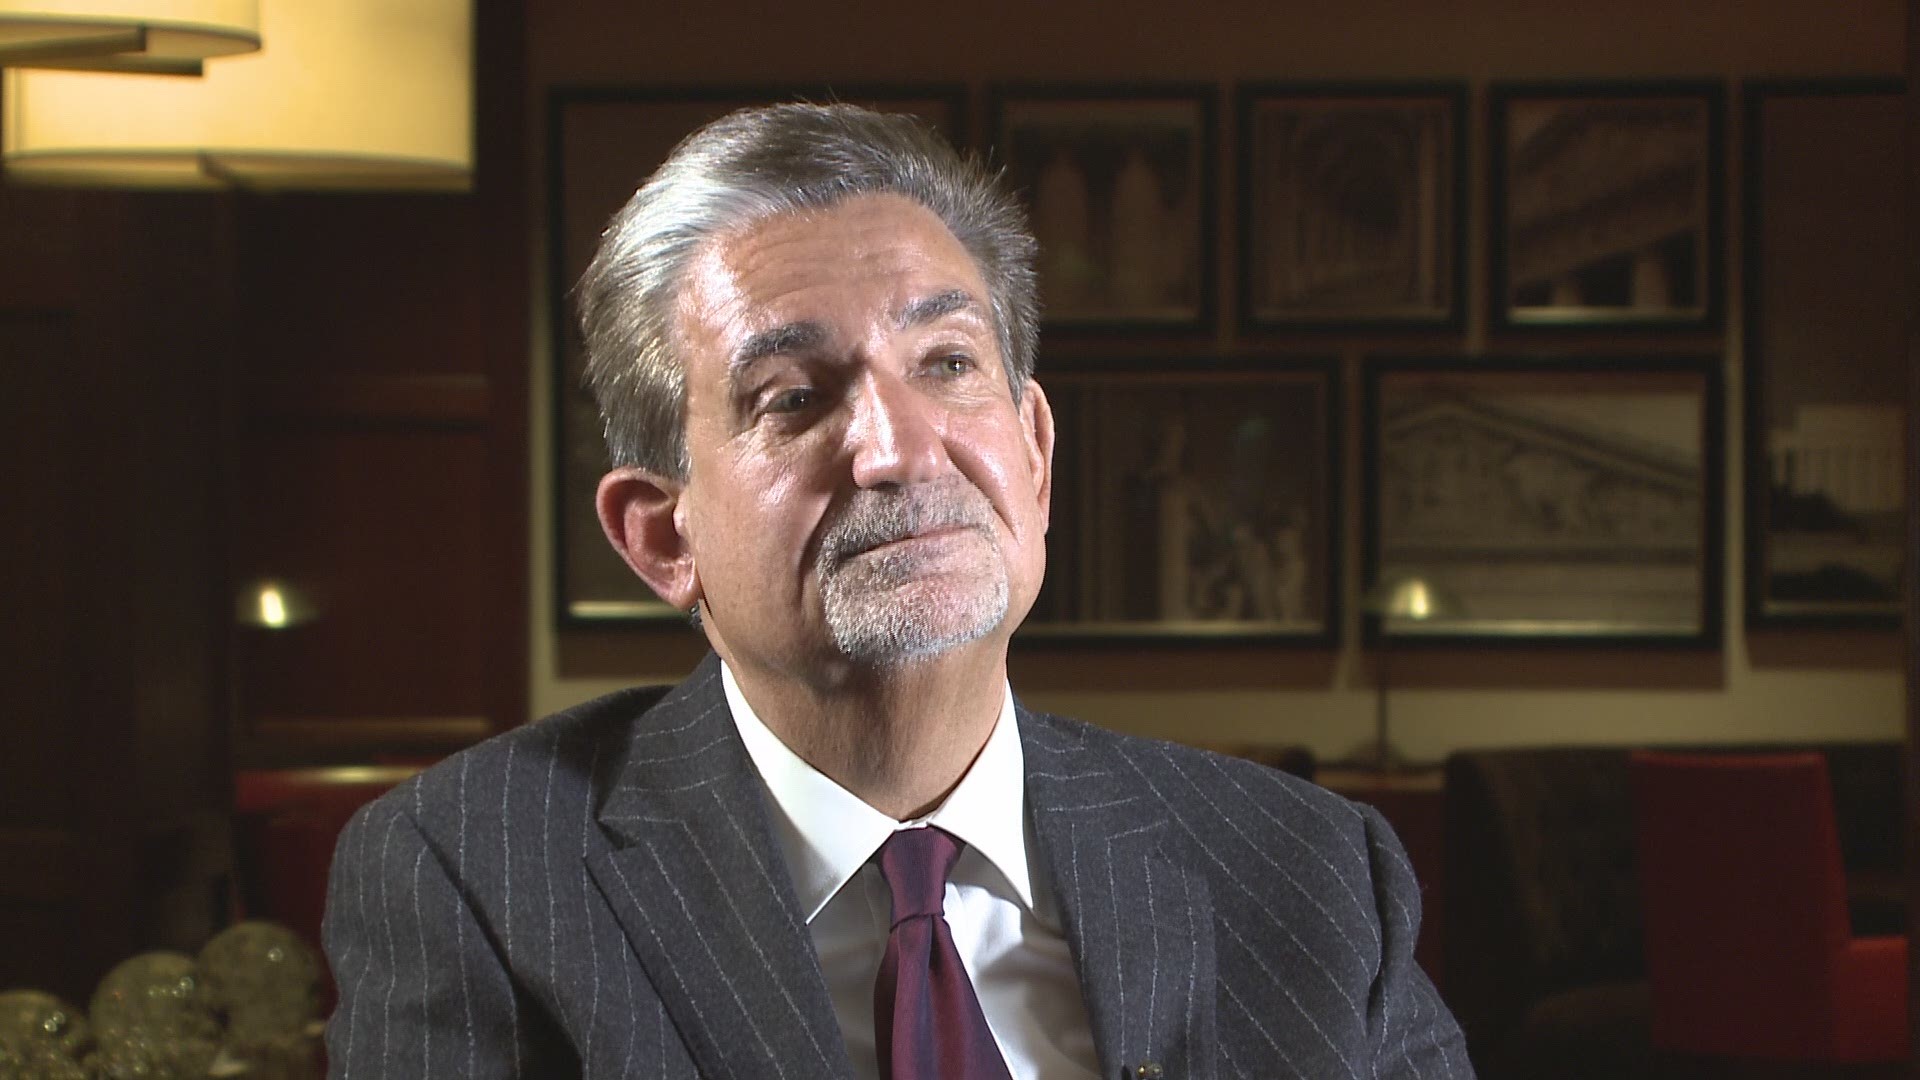 How to turn your arena into a sports book: Ted Leonsis will soon find out